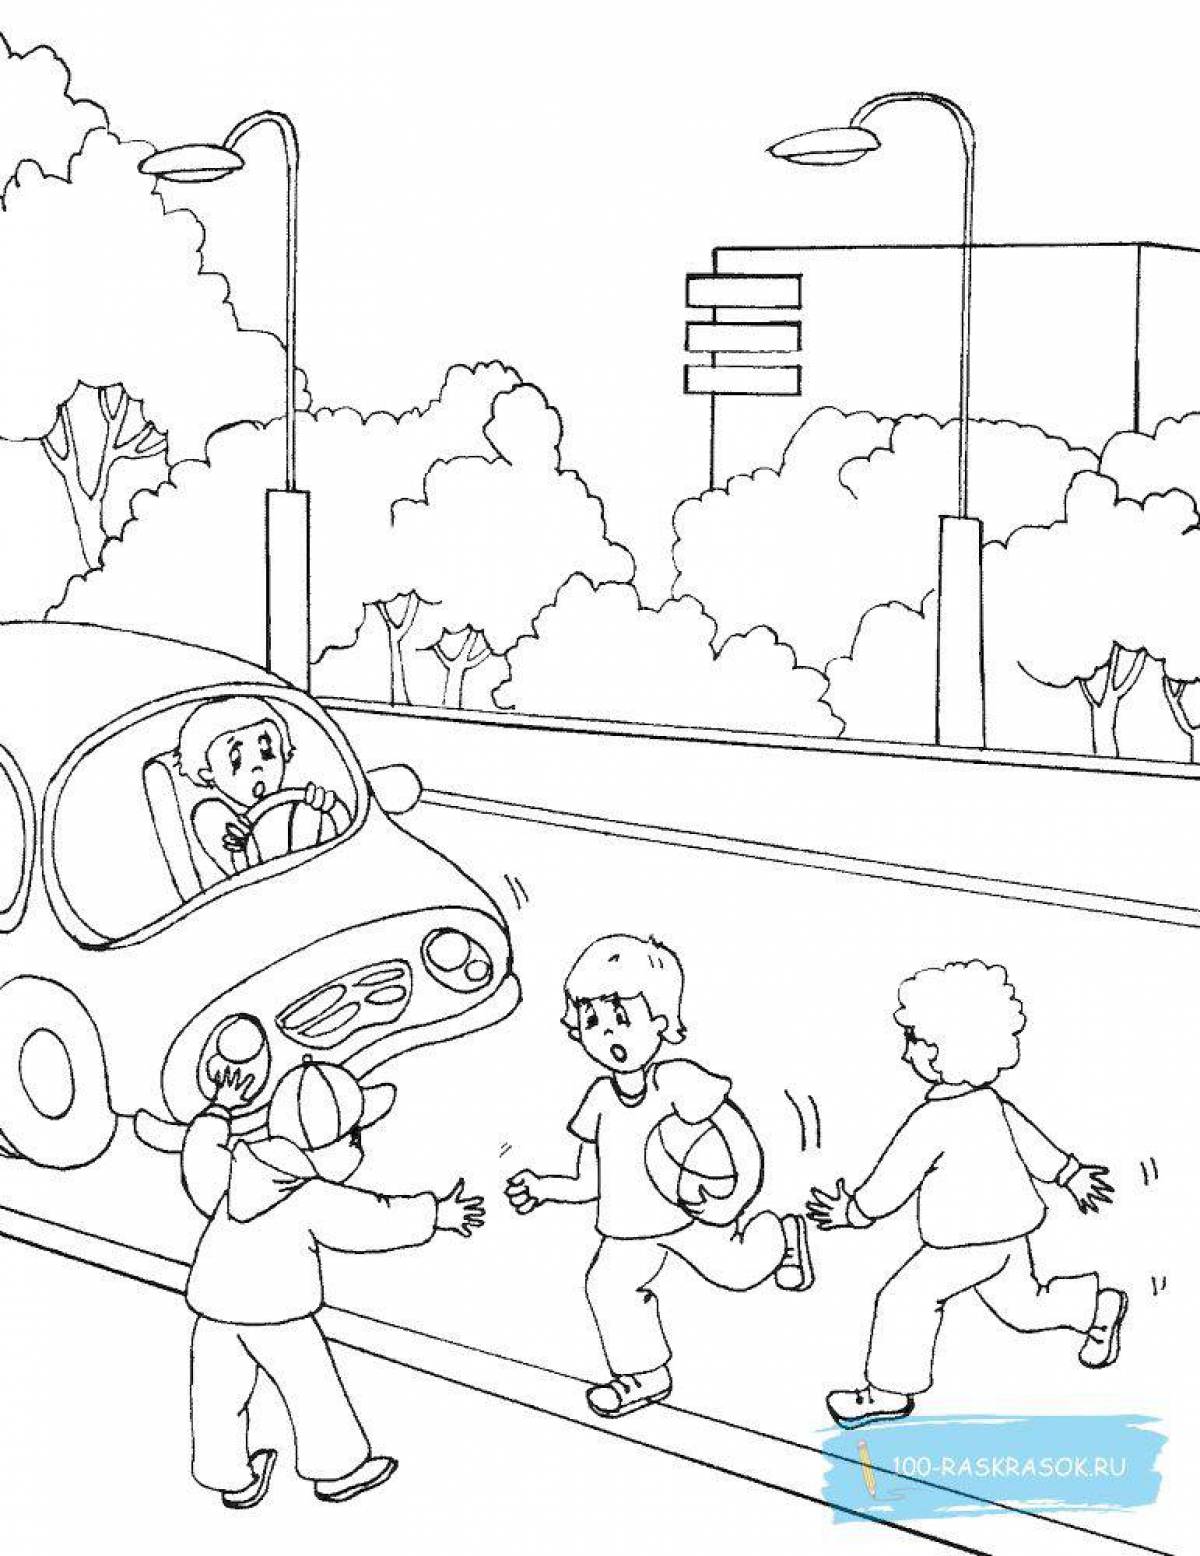 Coloring book exquisite rules of the road